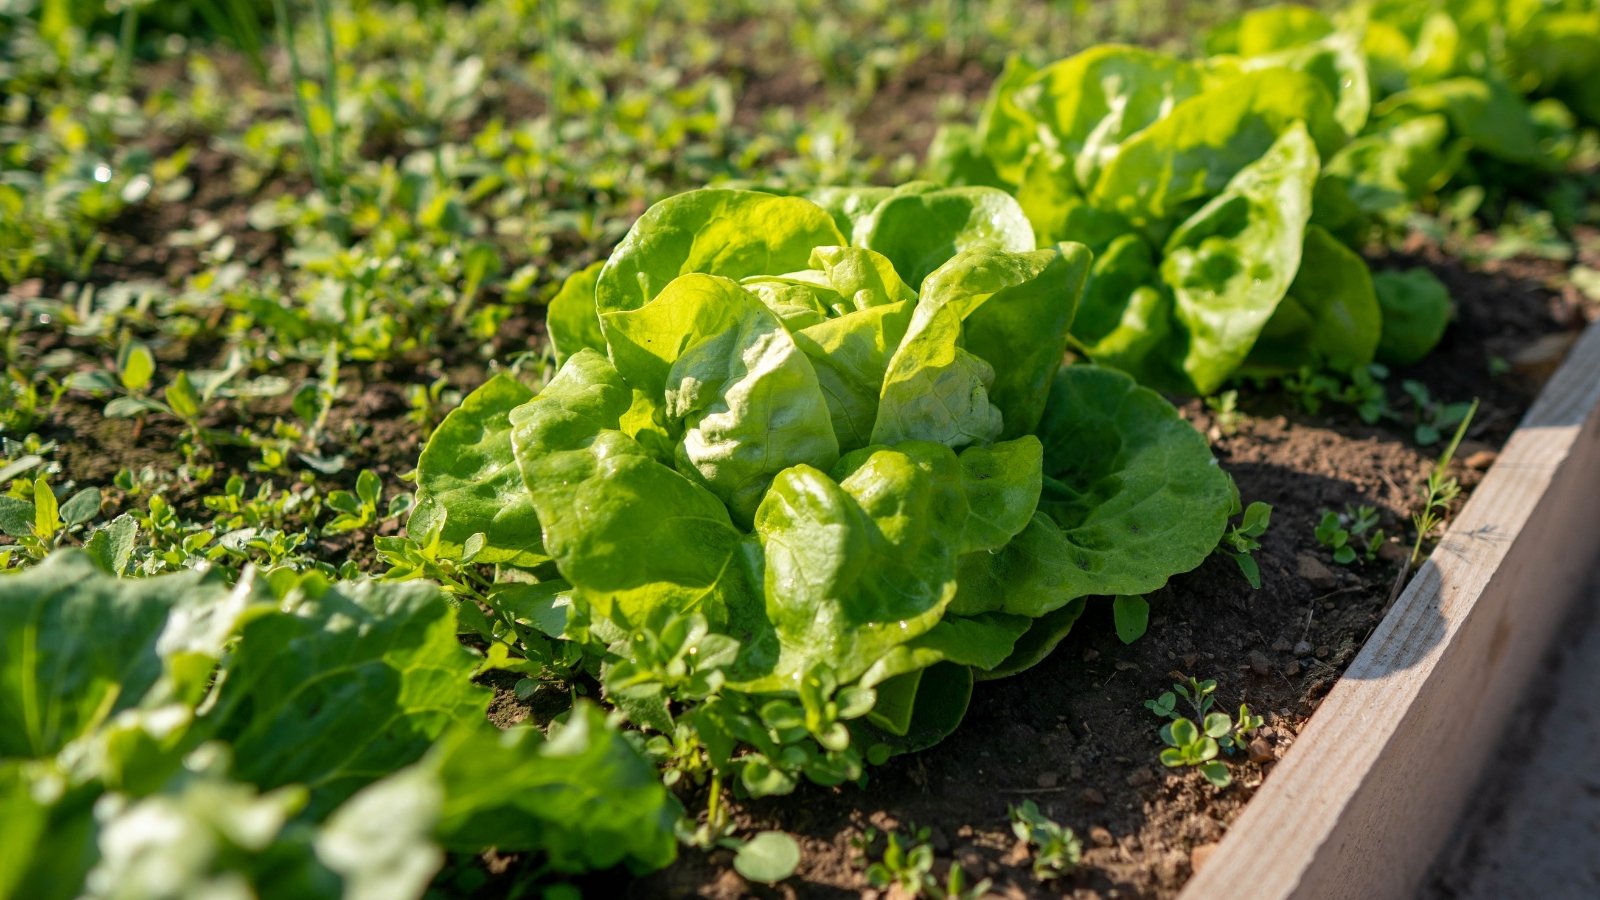 Fresh green lettuce leaves grow in neat rows, thriving within a wooden raised bed, soaking up the warm sunlight, poised for harvest in a flourishing garden.